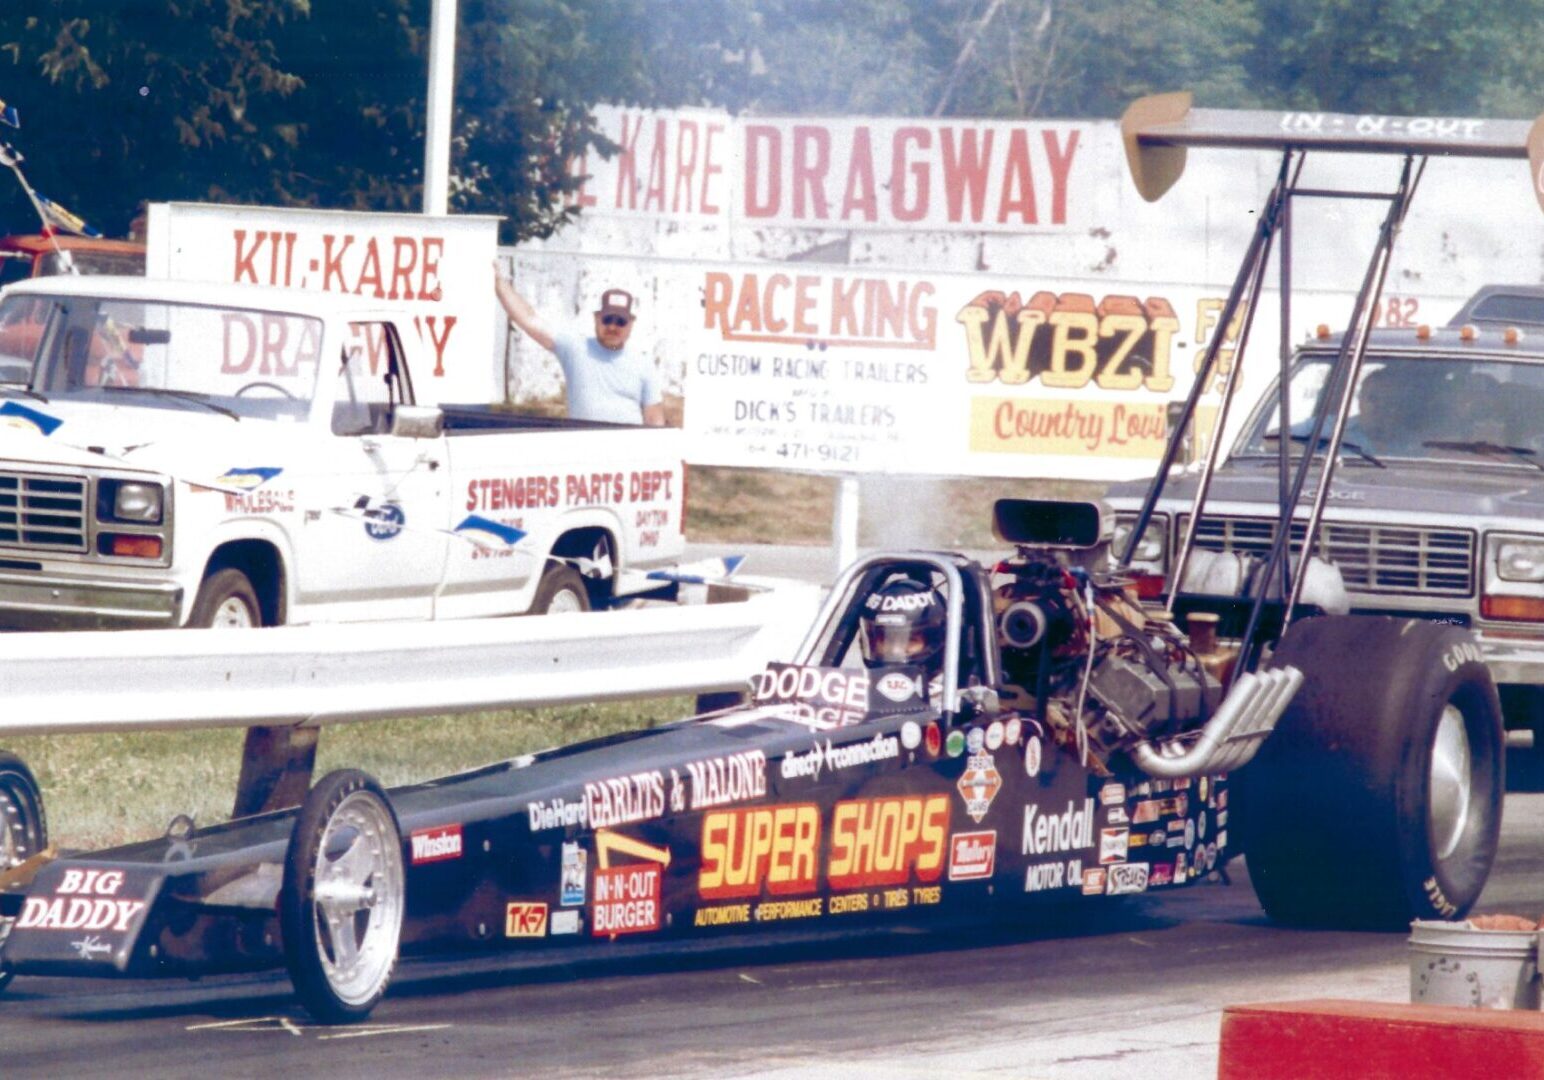 Swamp Rat 29 was the first top fuel dragster with major sponsorship for Big Daddy.  On its fourth run, in Arizona, at a blistering 259 MPH and 5.45 seconds ET the wing collapsed. “Big” took drag racing’s fastest tumble at Fire Bird Raceway.  Unhurt, Don, Herb Parks, Eddie and Billy Garlits put Swamp Rat 29 back together and went on to win many events including the 1985 US Nationals, Don’s second straight US Nationals Championship, and the 1985 NHRA World Championship; Don’s second NHRA World Championship. Swamp Rat 29 had a top speed of 268.01 MPH and 5.436 second ET. 